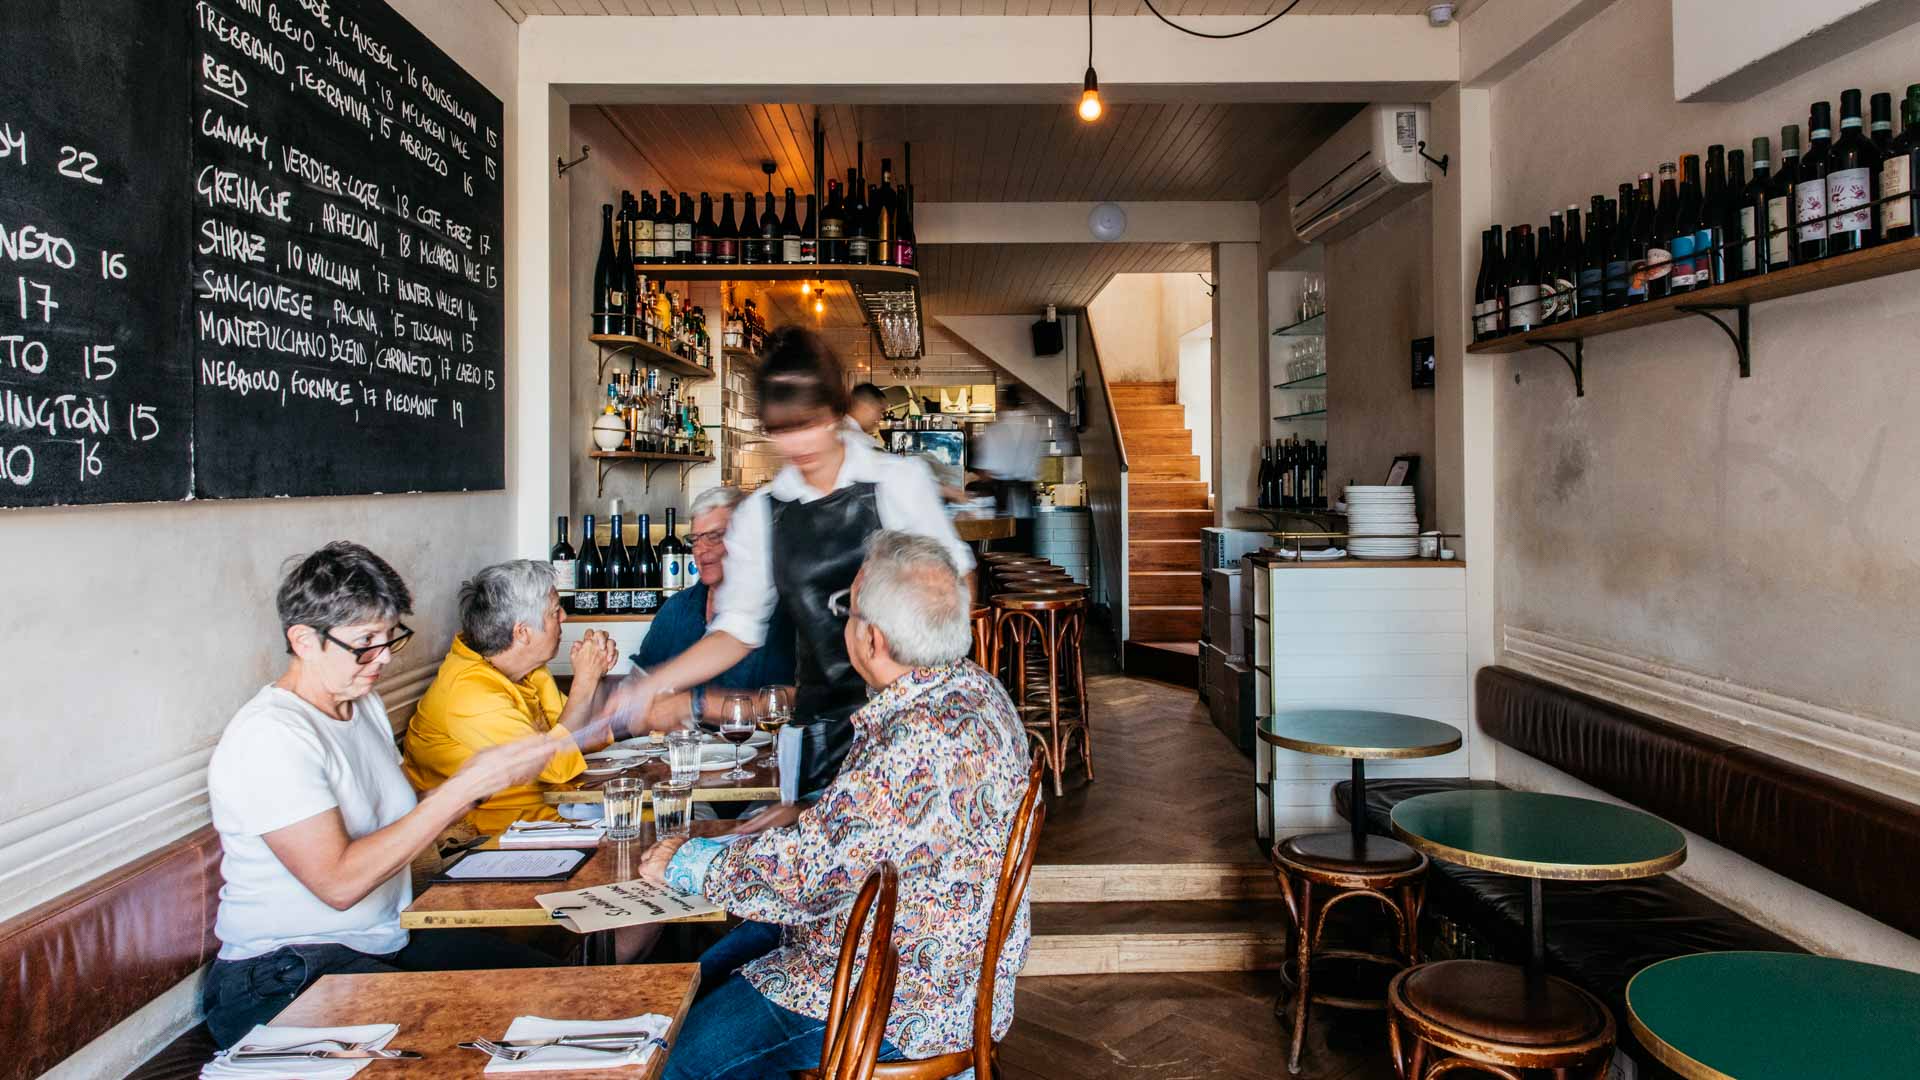 10 William Street - one of the best wine bars in sydney